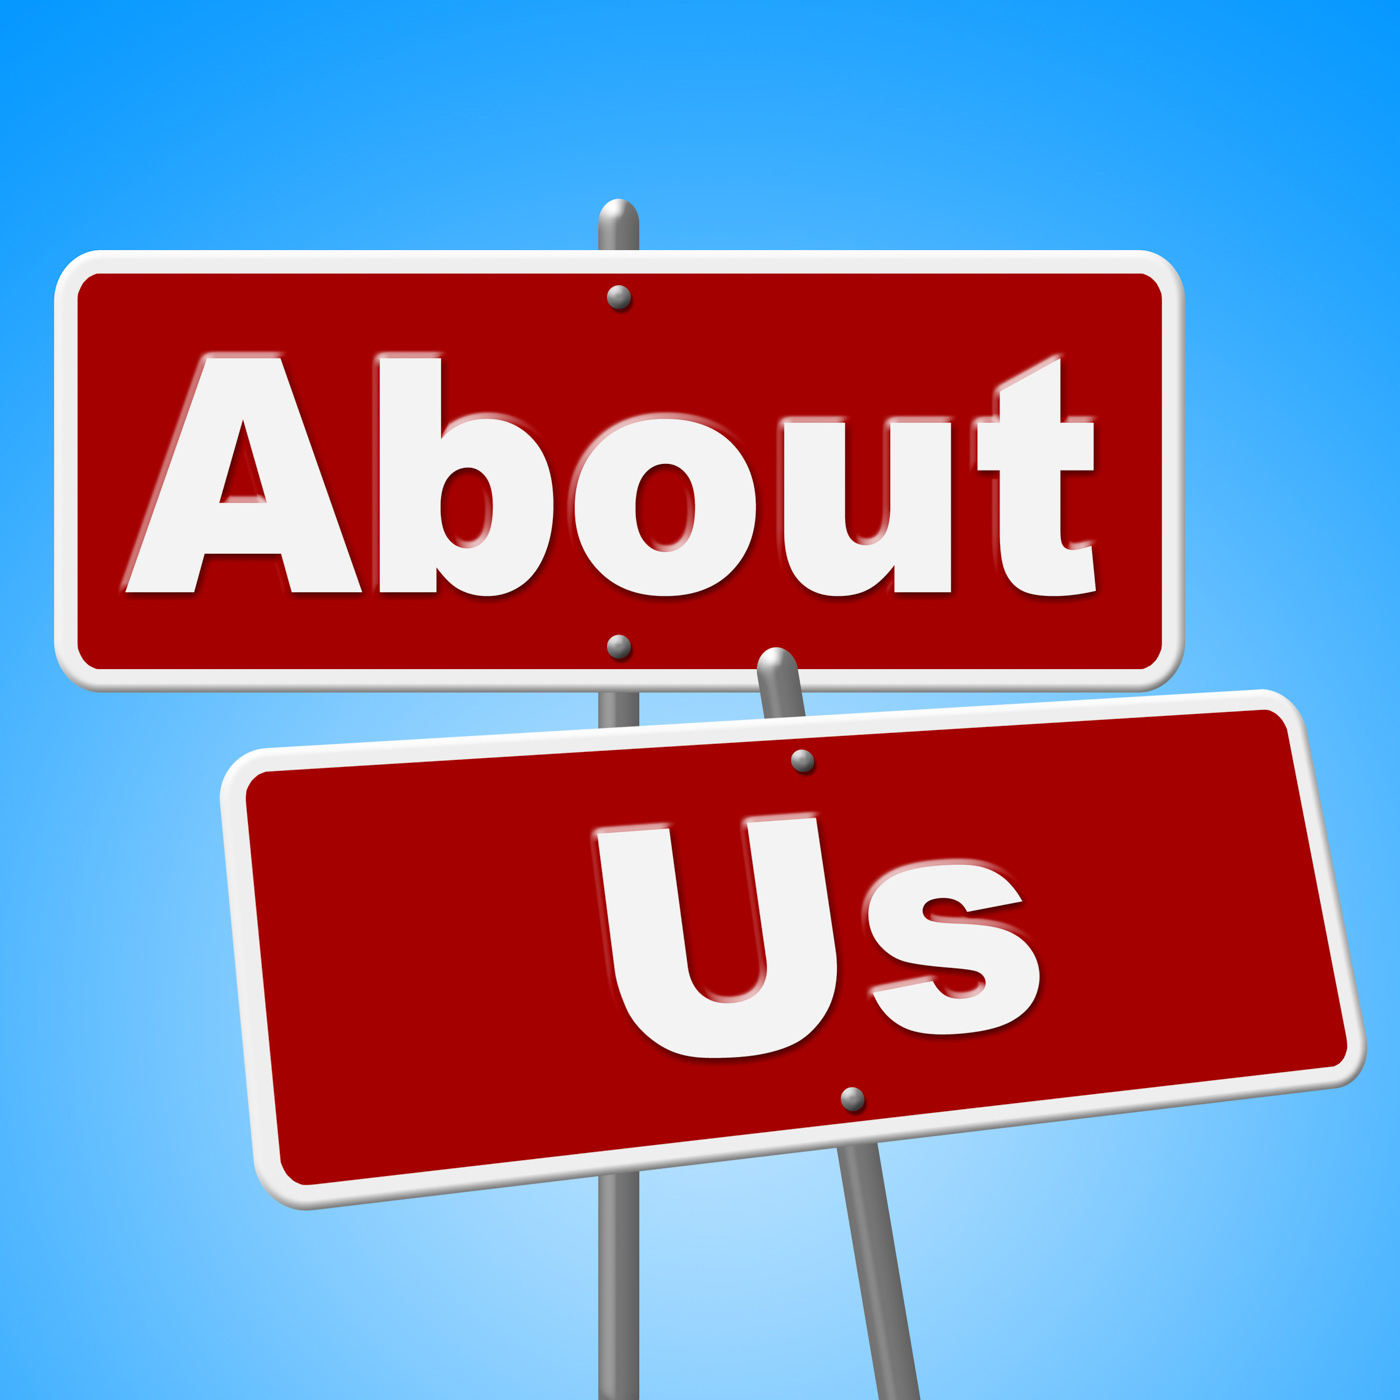 About us signs represents corporate contact and website photo